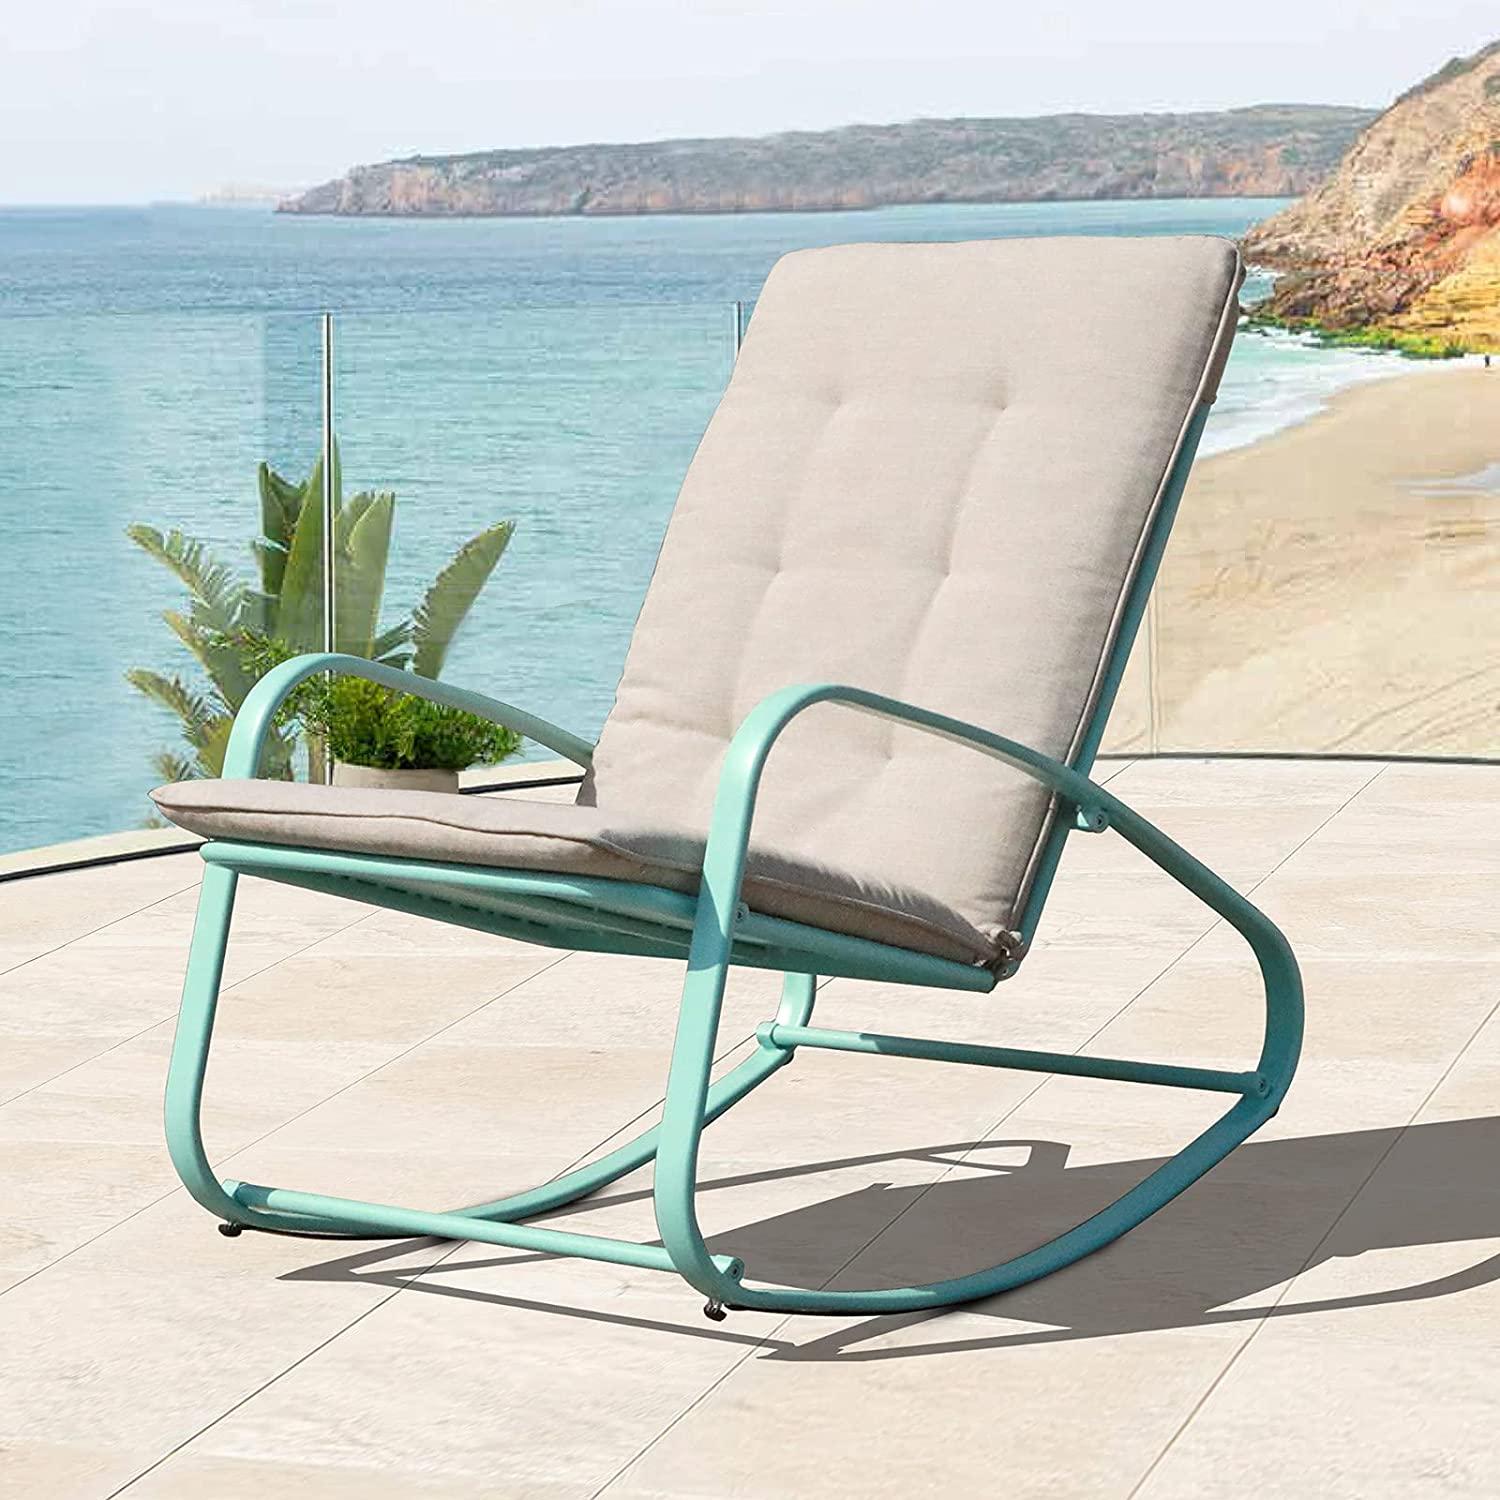 Amazon.com: COBANA Patio Rocking Chair Outdoor Metal Rocker Chairs with  Detachable Cushion for Porch, Balcony, Poolside and Indoor Use, 1 PCS,  Turquoise : Patio, Lawn & Garden